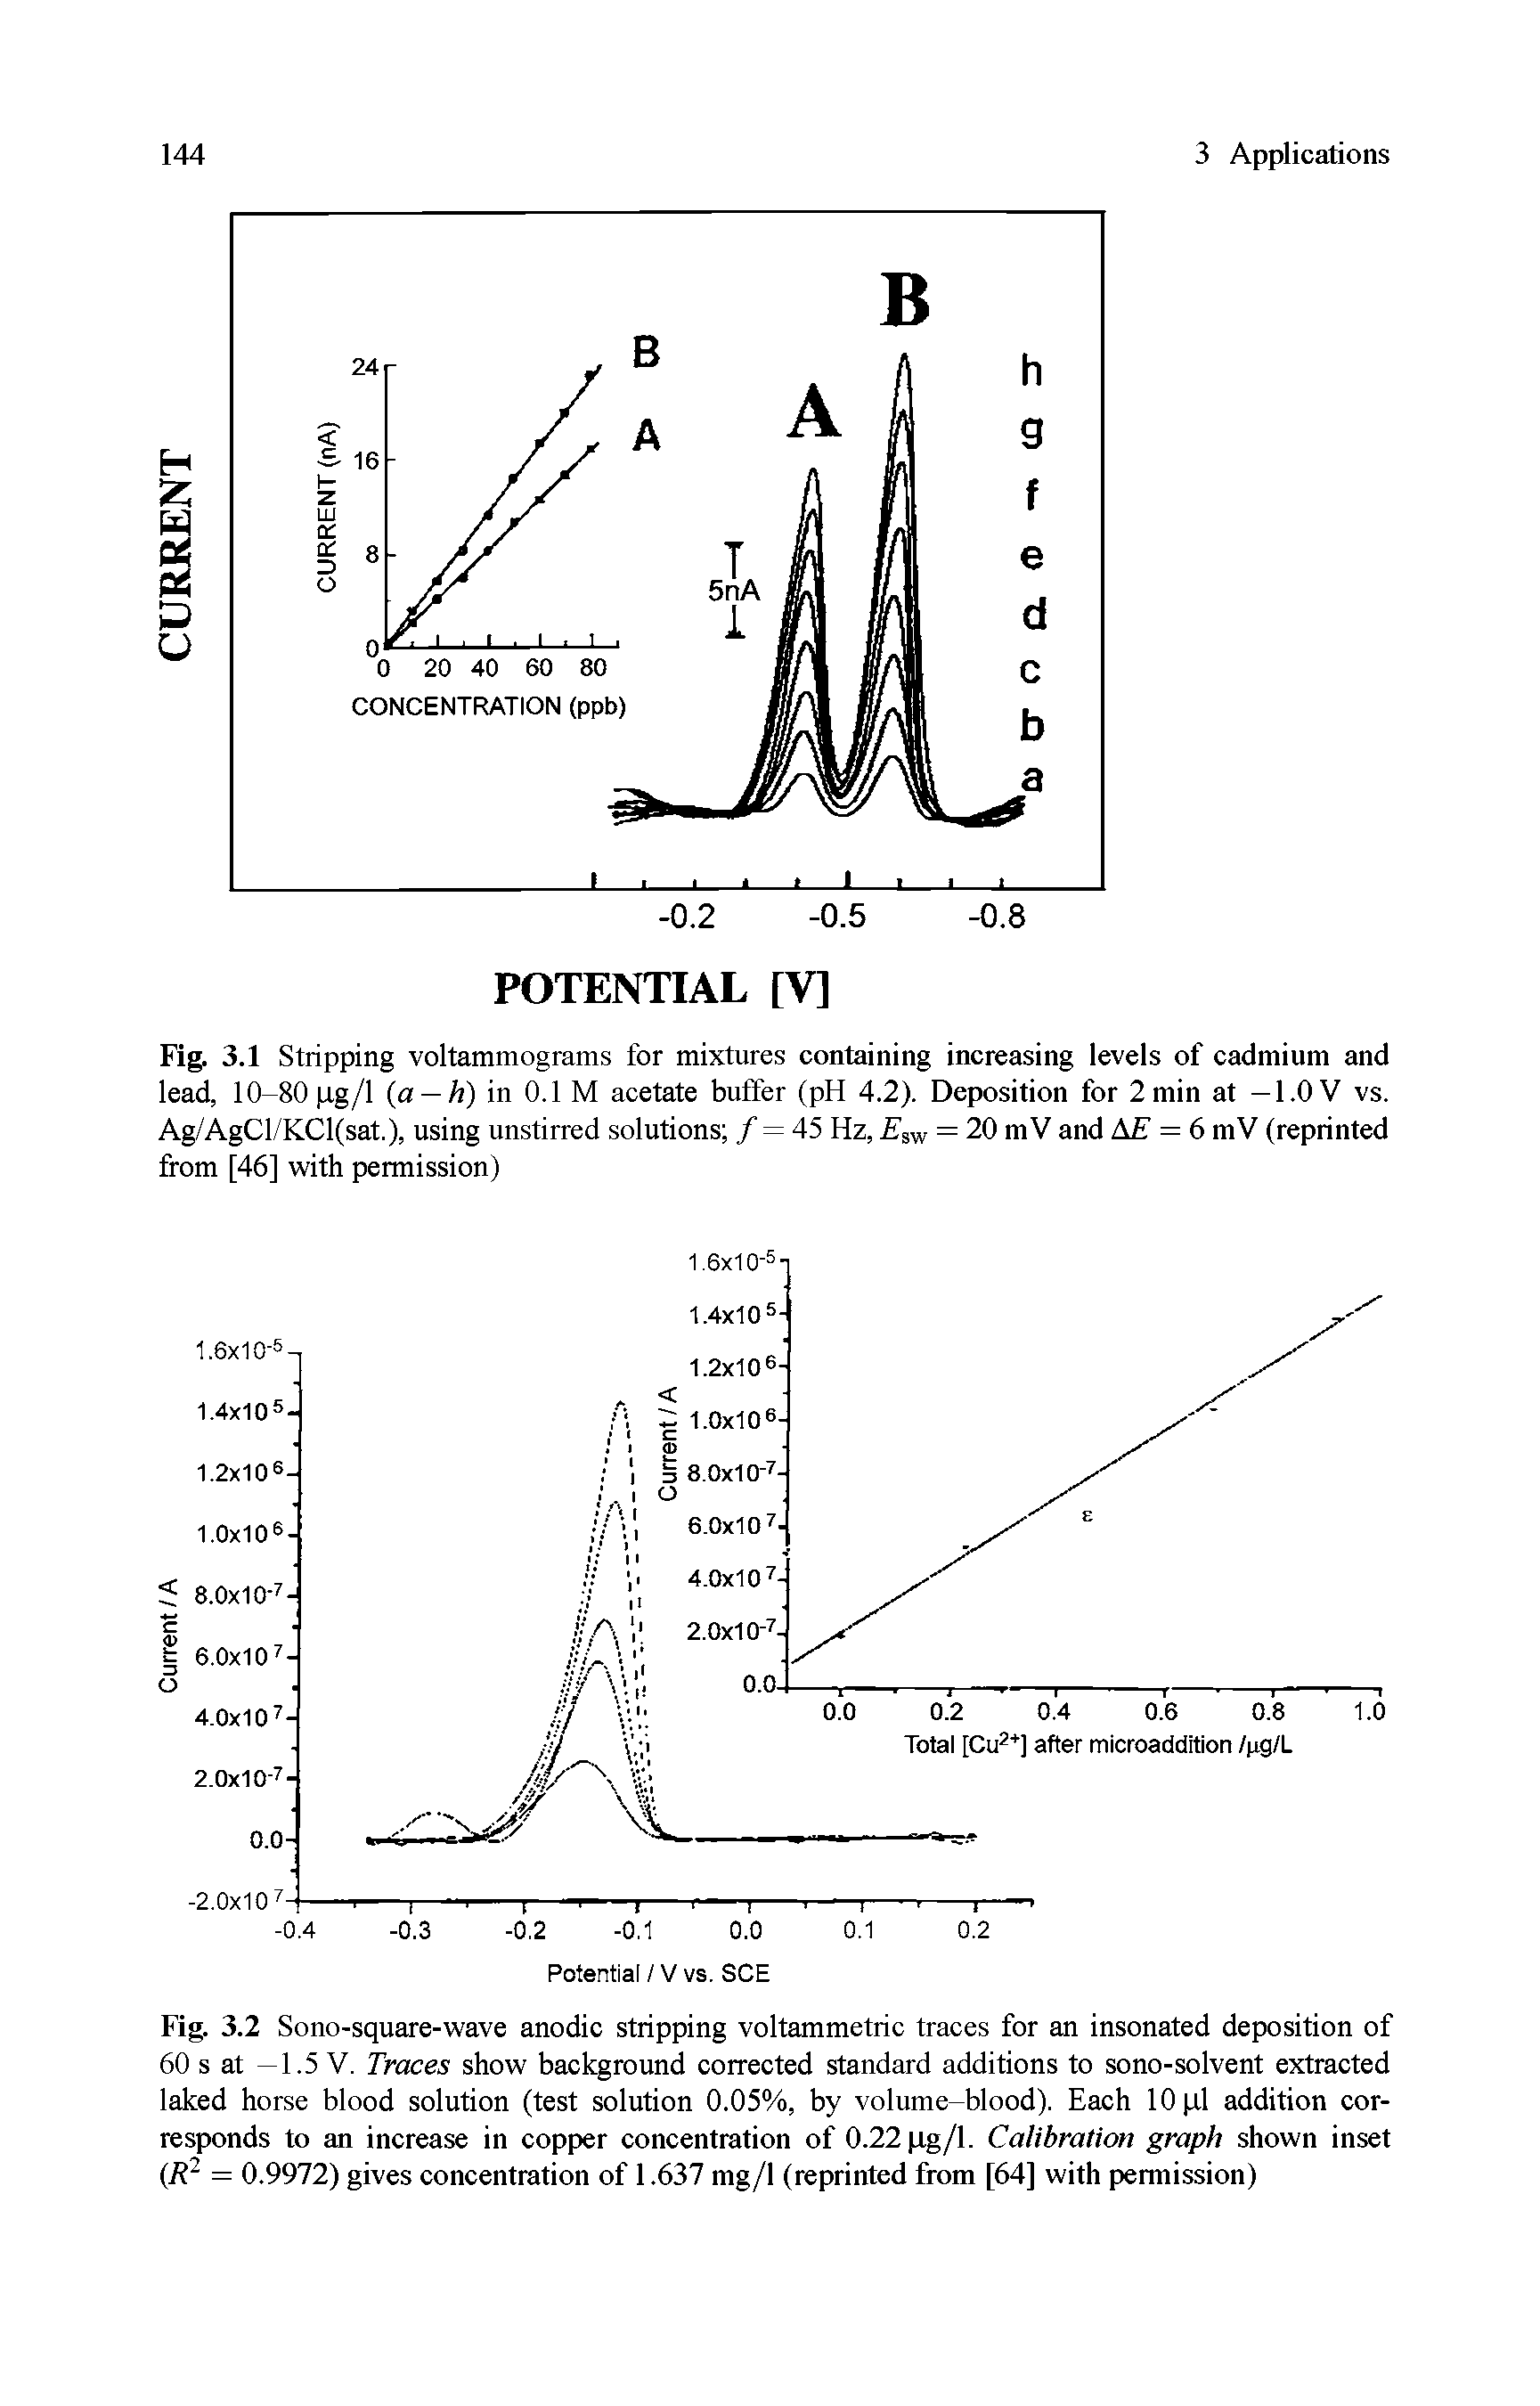 Fig. 3.1 Stripping voltammograms for mixtures containing increasing levels of cadmium and lead, 10-80 tg/l (a — h) in 0.1 M acetate buffer (pH 4.2). Deposition for 2min at —l.OV vs. Ag/AgCl/KCl(sat.), using unstirred solutions /= 45 Hz, sw = 20 mV and AE = 6 mV (reprinted from [46] with permission)...